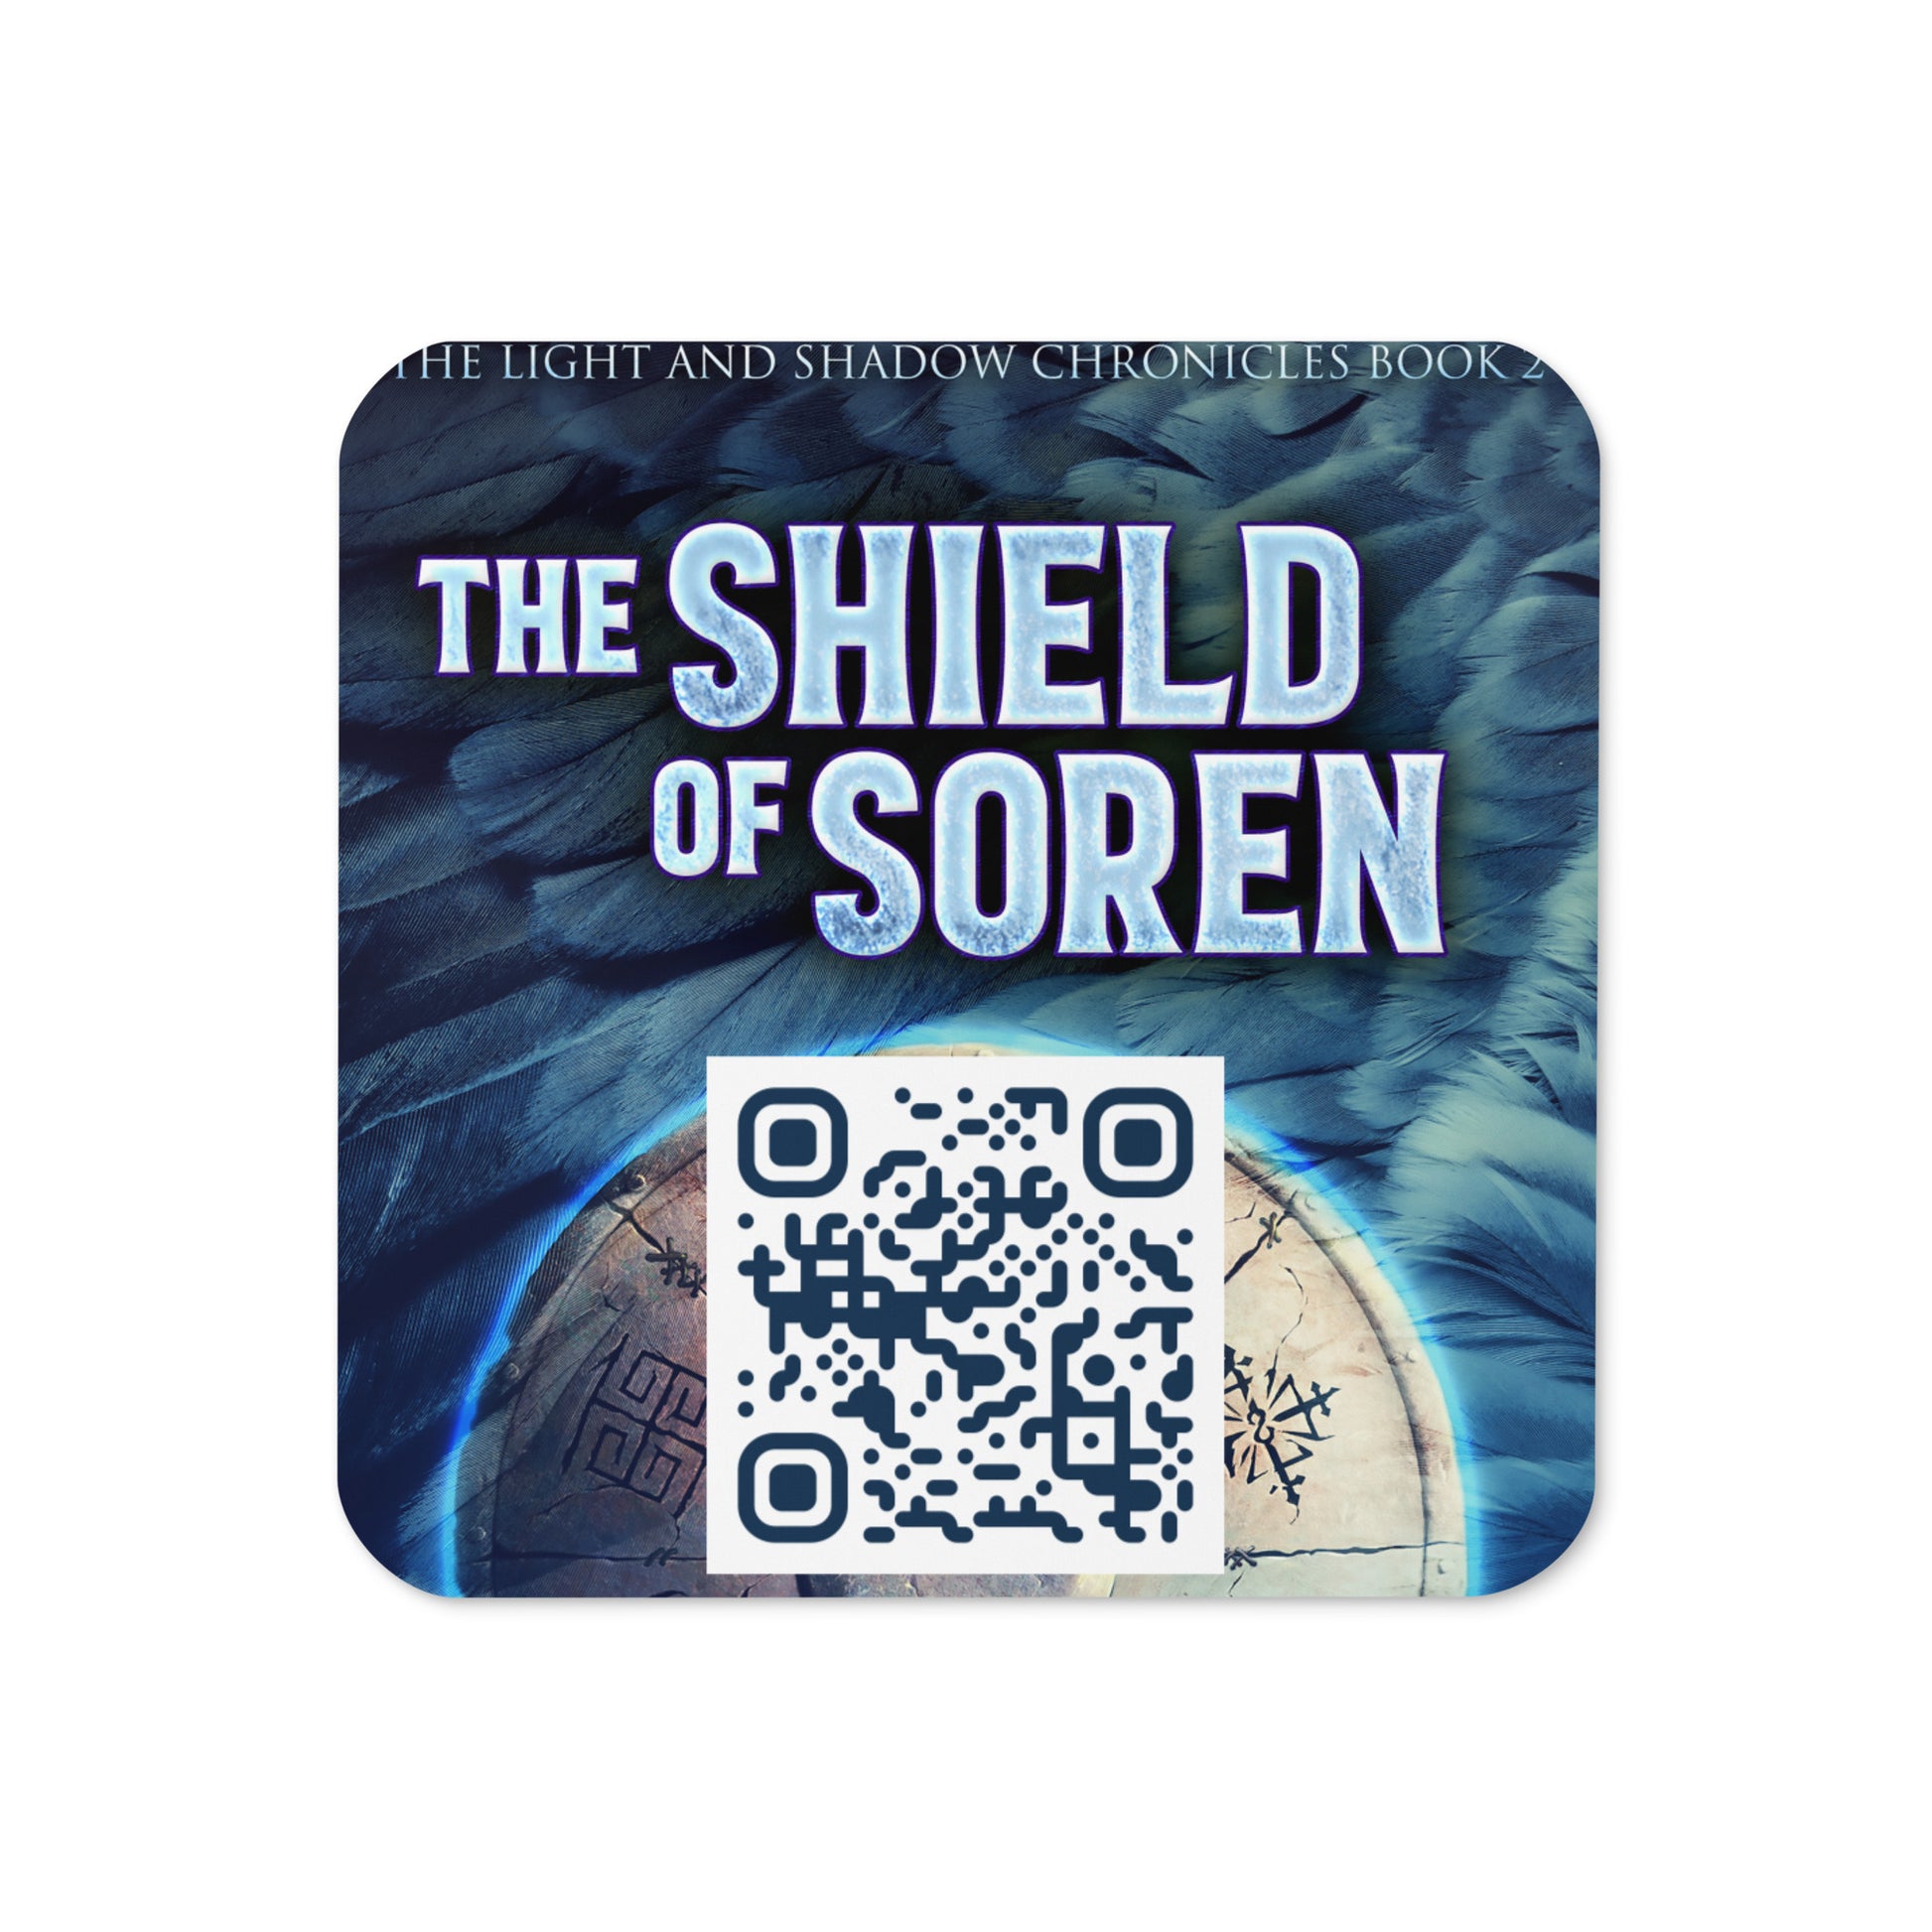 coaster with cover art from D.M. Cain's book The Shield of Soren